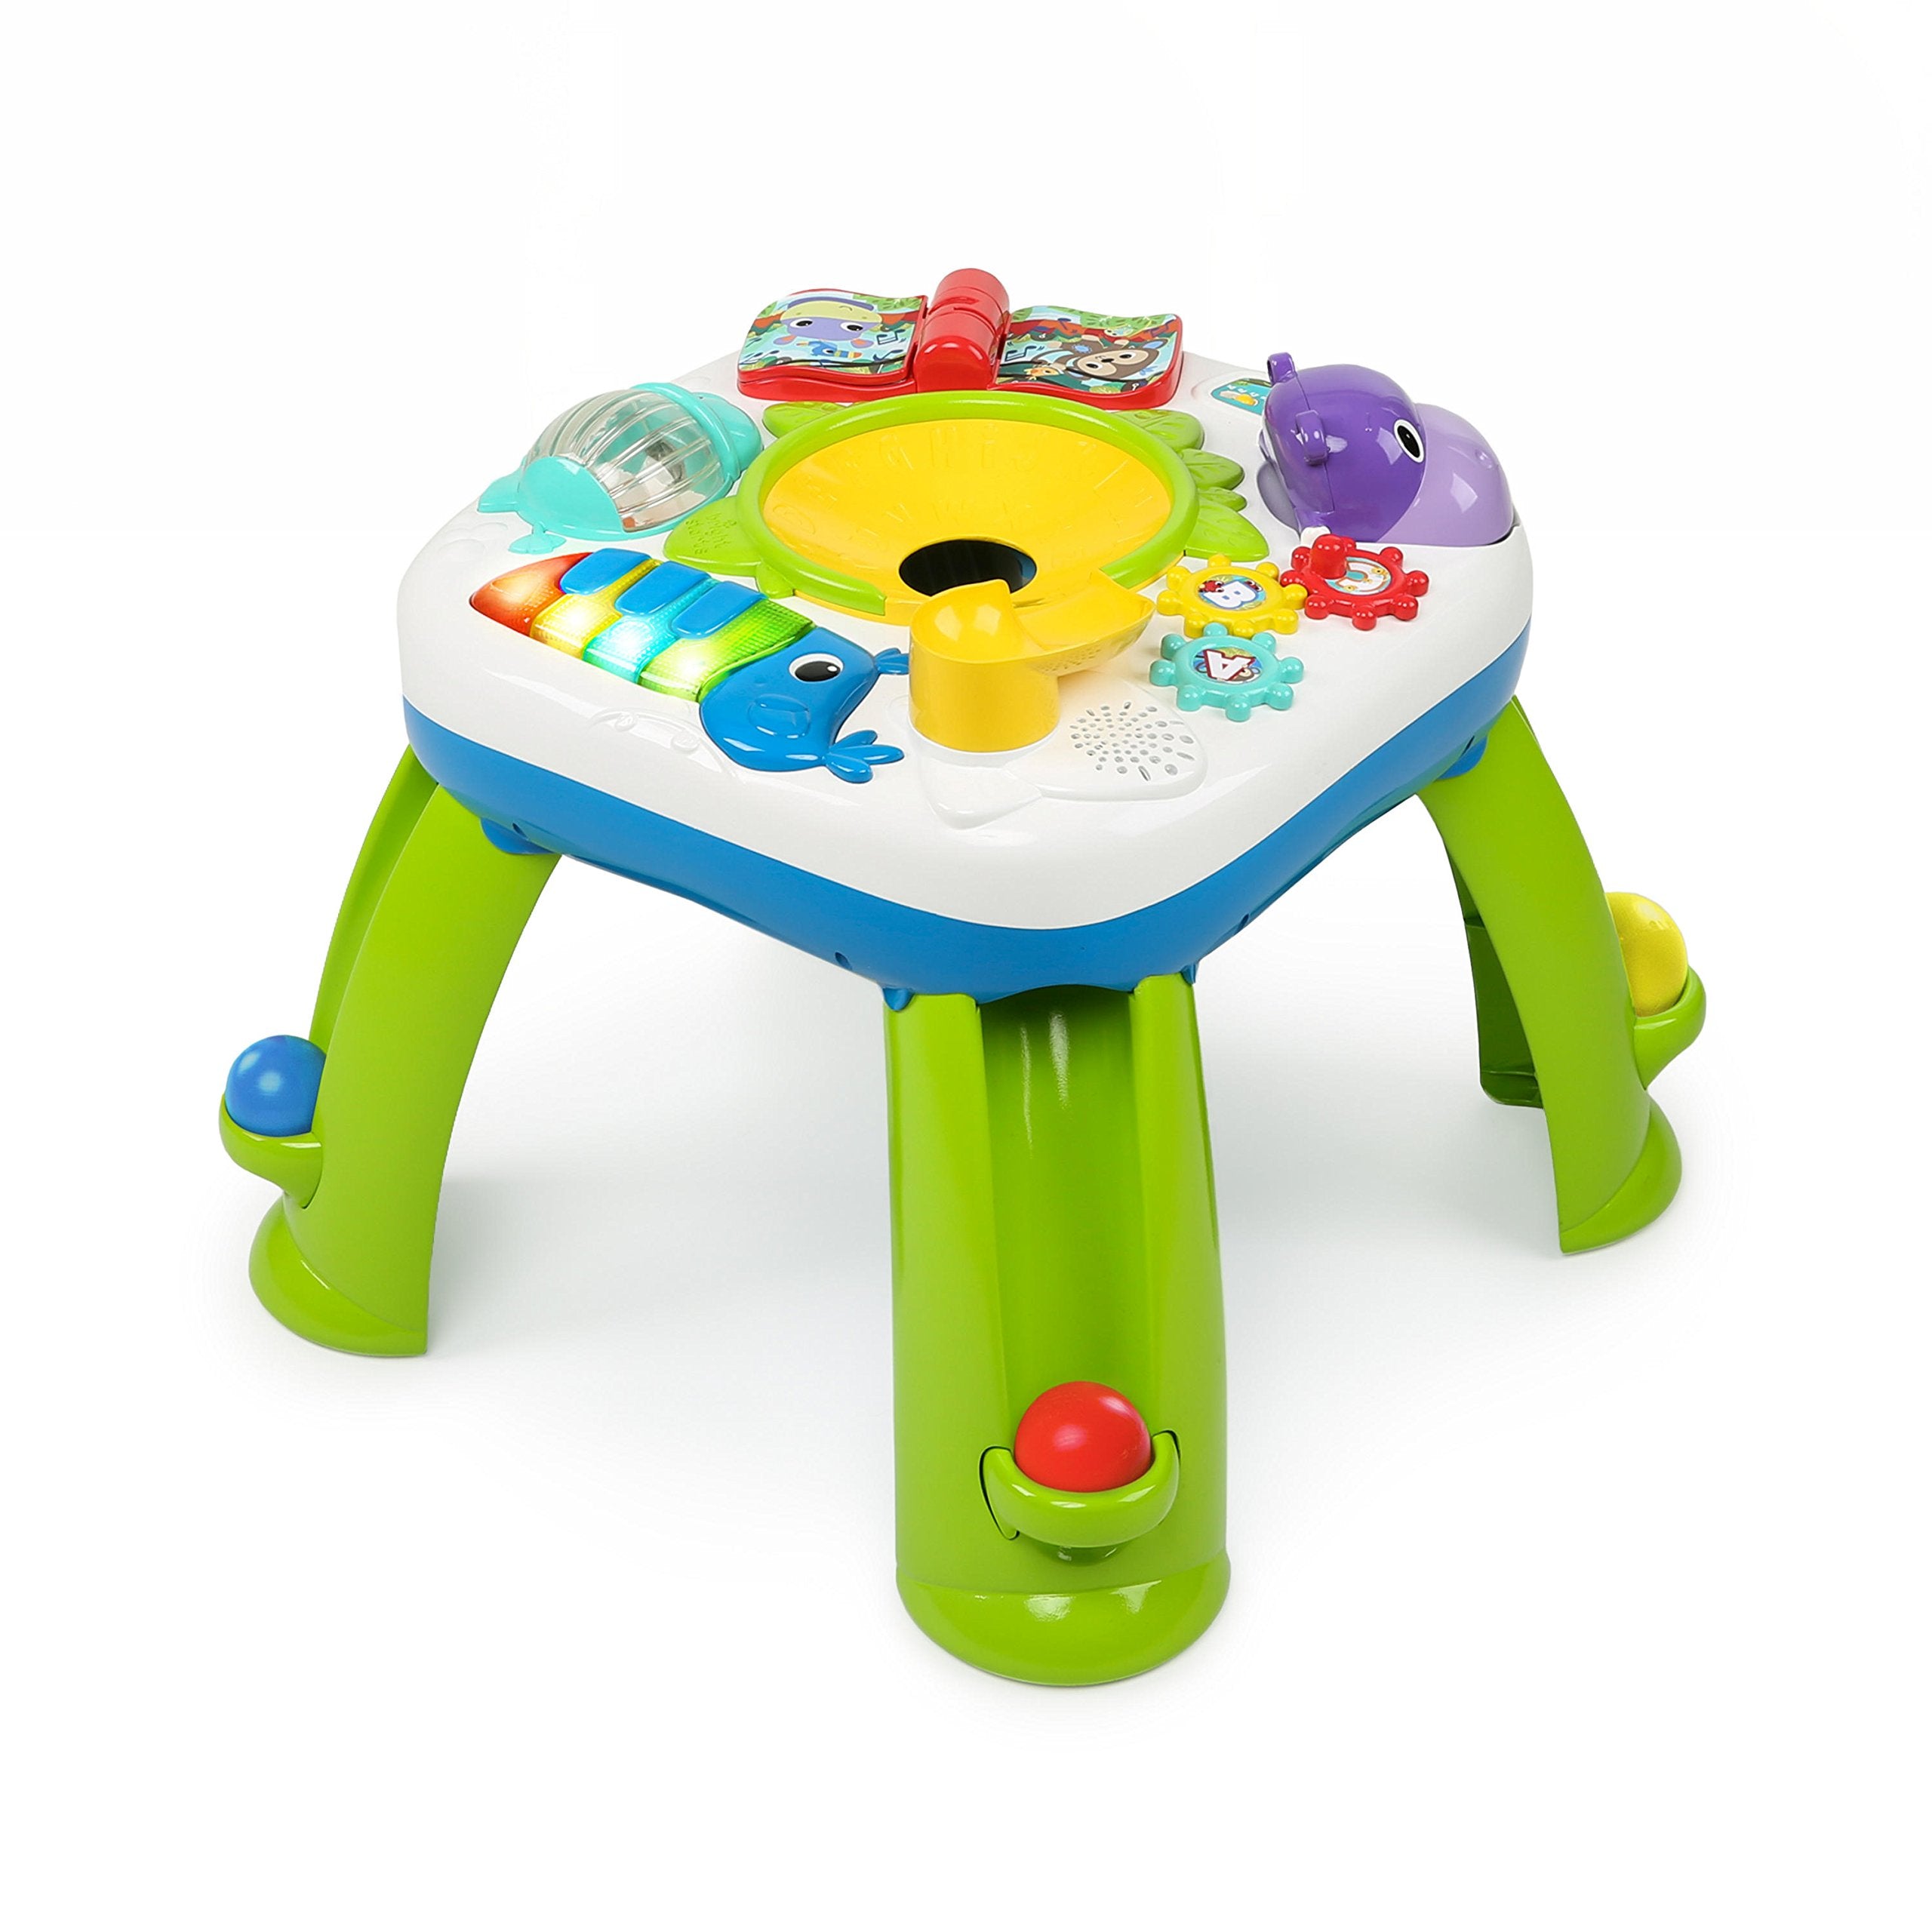 Bright Starts Having a Ball Get Rollin' Activity Table for Toddlers, Sensory & Educational Toy with Sounds & 4 Languages - Includesr +60 Songs, 6 Balls, ramp, Piano, Book, Jungle-Themed, 6 Months +